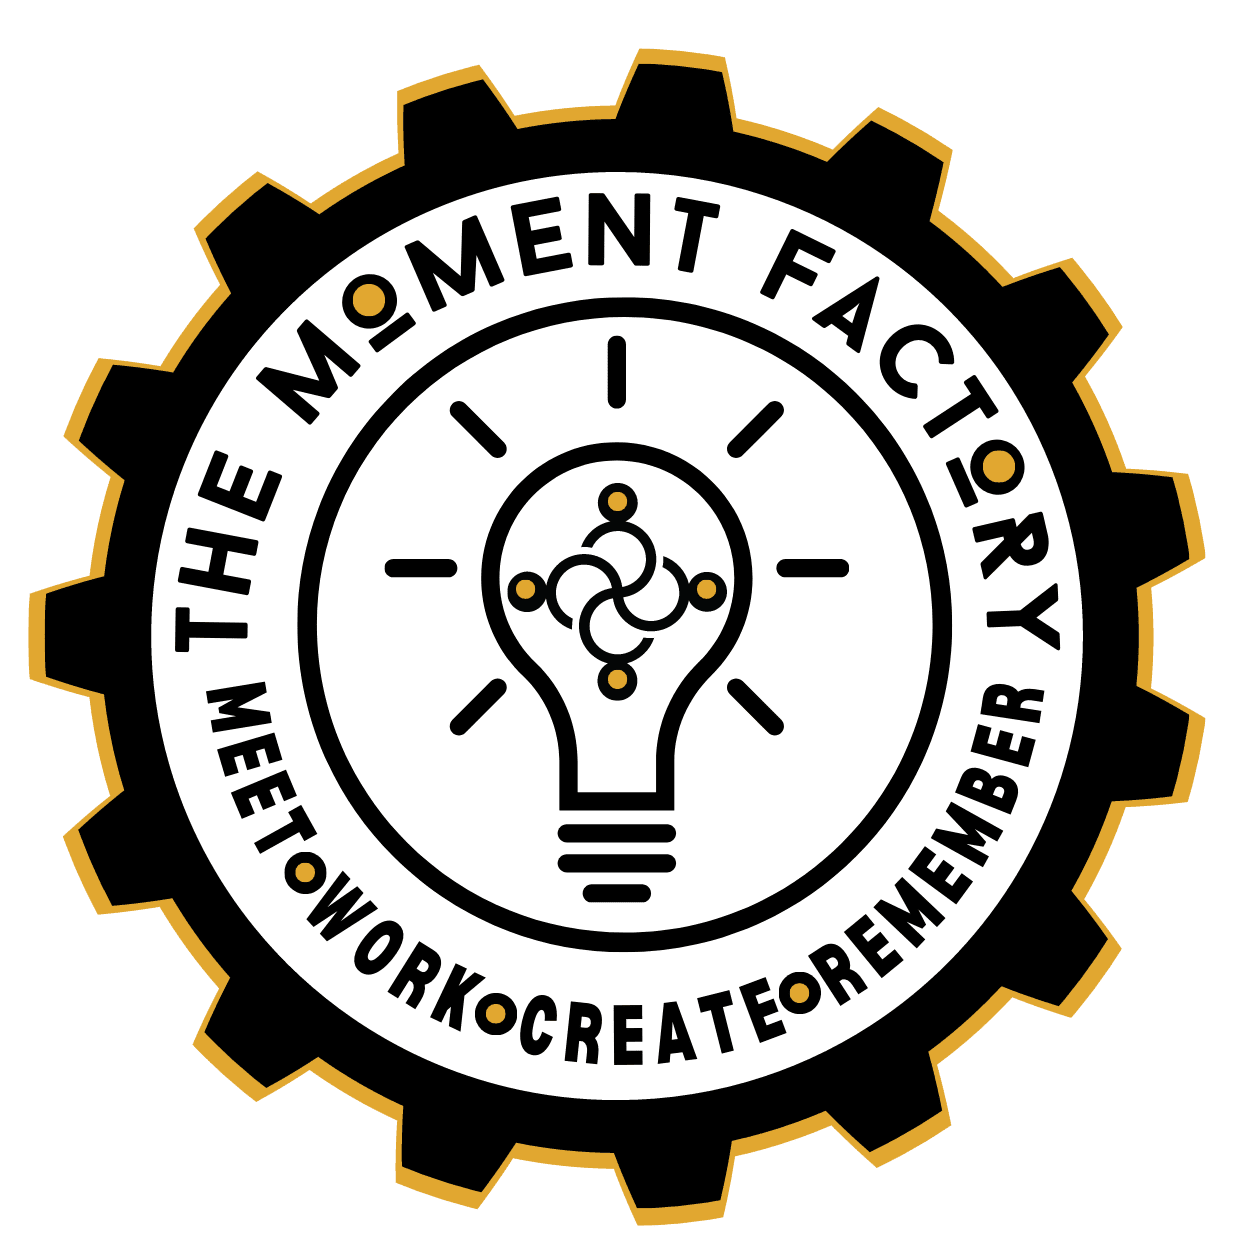 THE MOMENT FACTORY